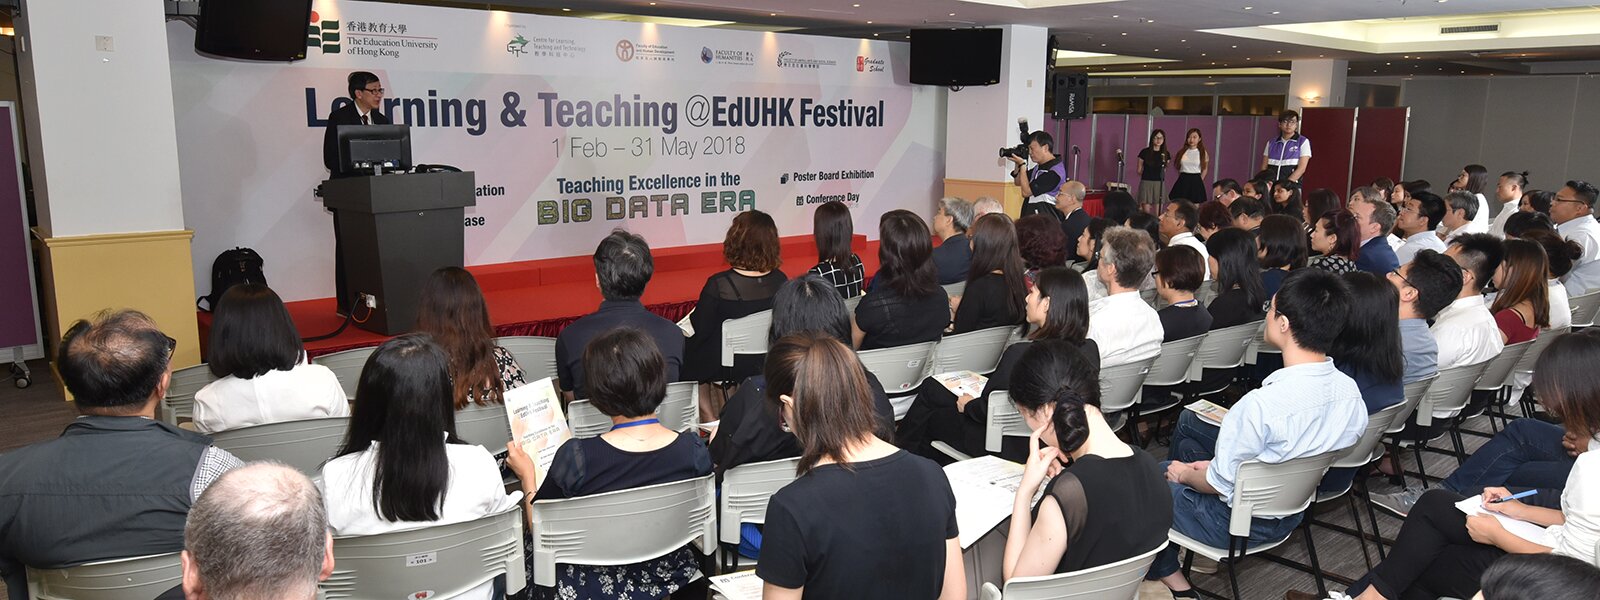 Conference Day of “Learning and Teaching @EdUHK Festival 2018”